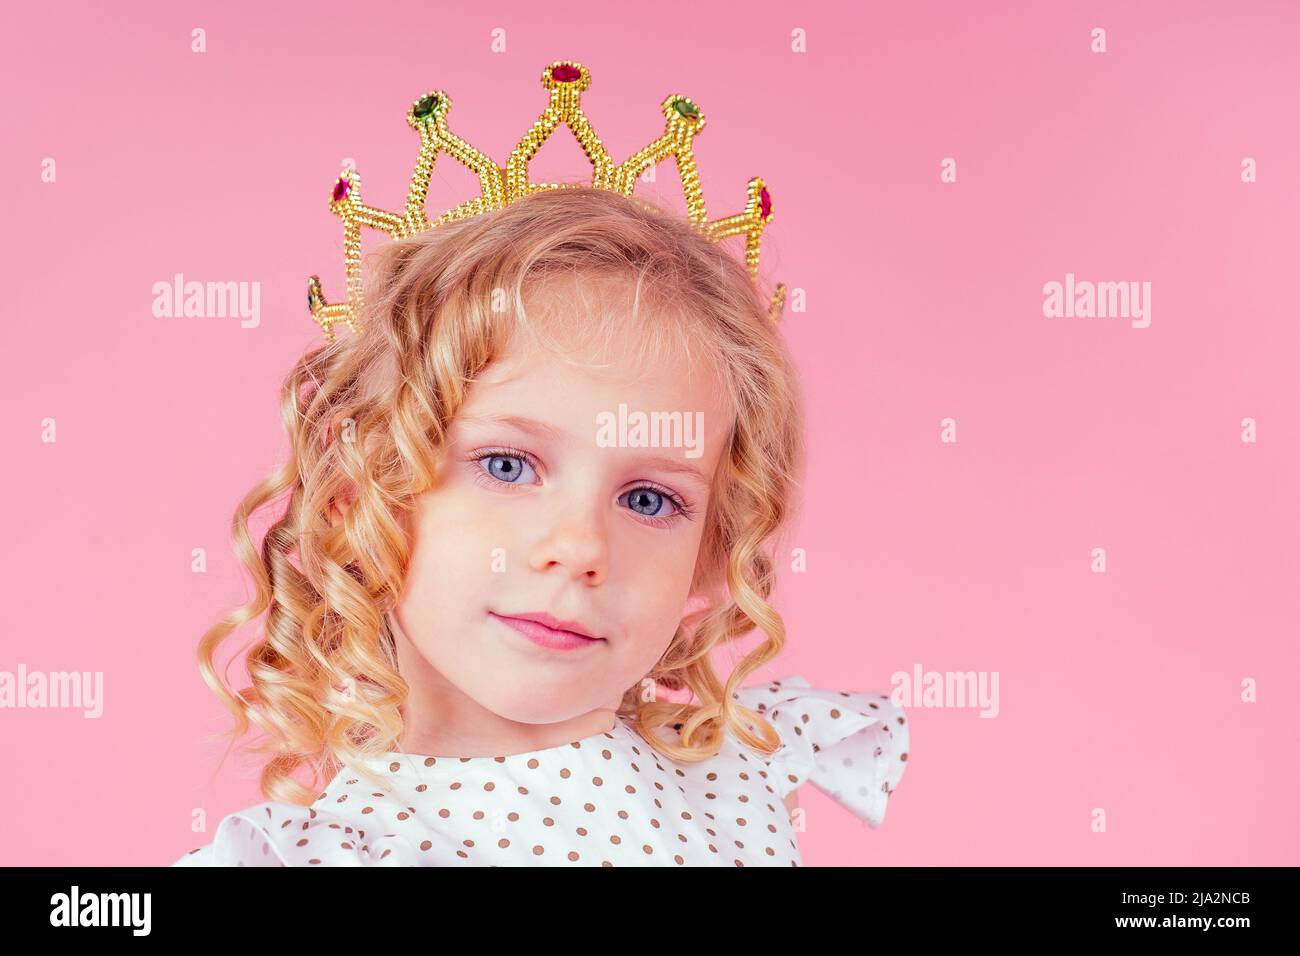 little girl beauty queen blue eyes, curls blonde hairstyle with a tiara crown on her head in a cute white dress in peas posing in the studio on a pink Stock Photo